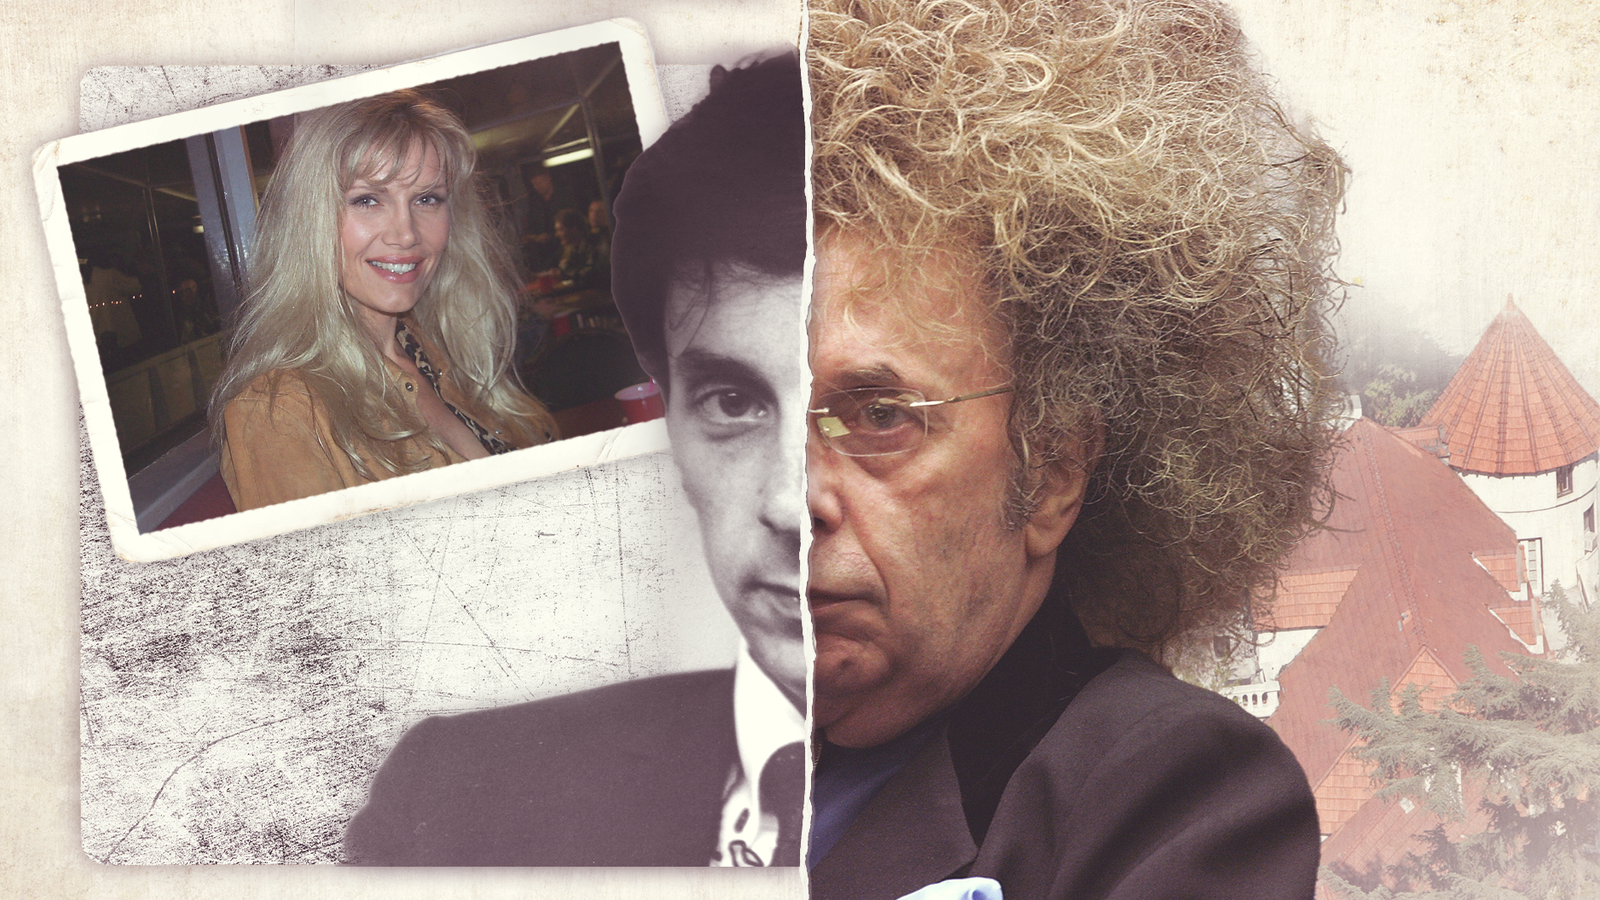 The murderer and musical genius: How Phil Spector killed actress – and why daughter is ‘trying to clear his name’